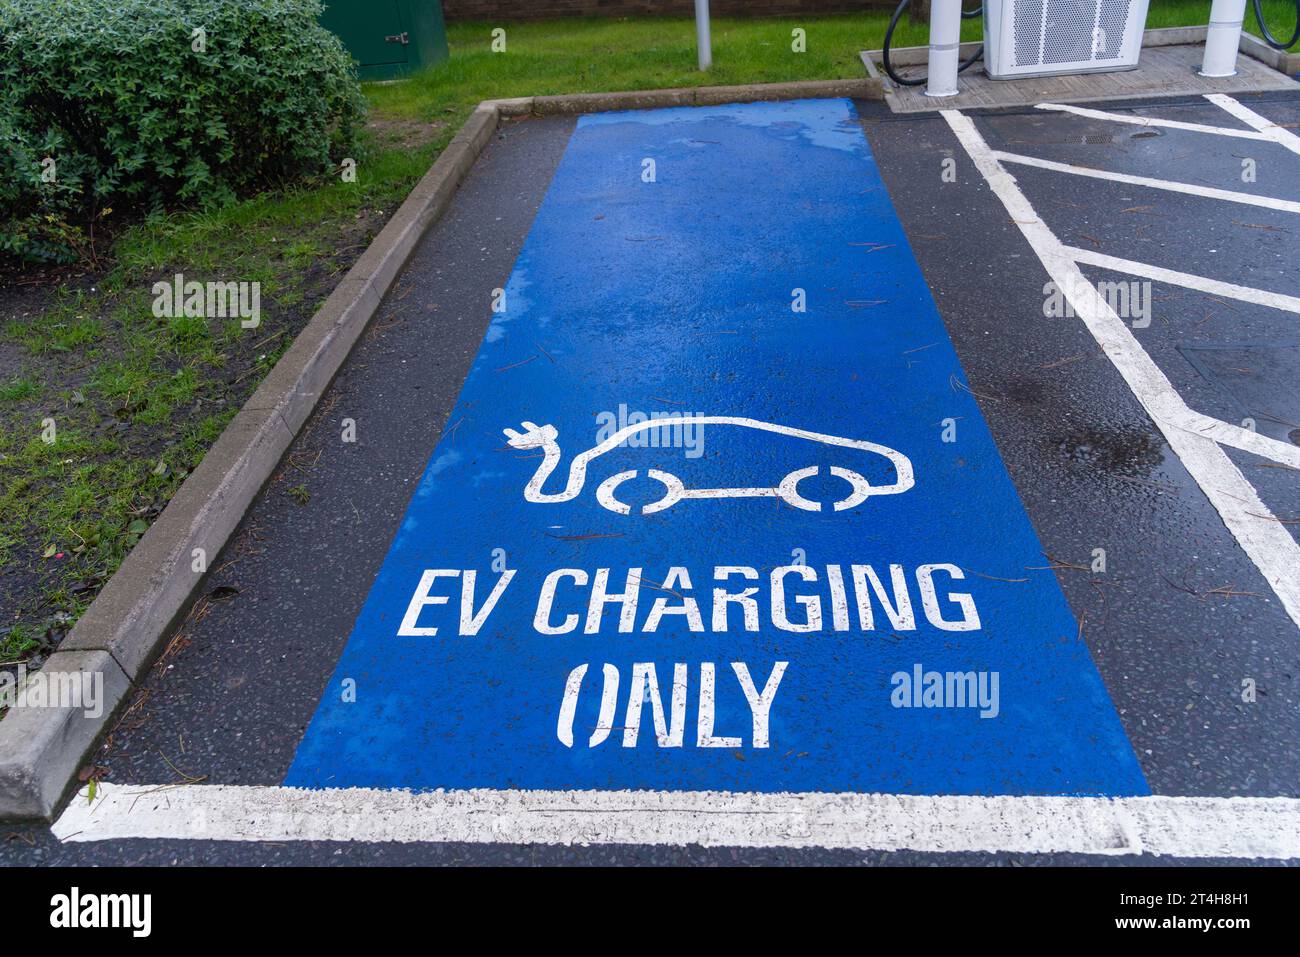 EV, charger installation, BP pulse, charging points, plug into fast, rapid, ultra-fast chargers, convenient, plug in, charging speeds, fleet charging. Stock Photo